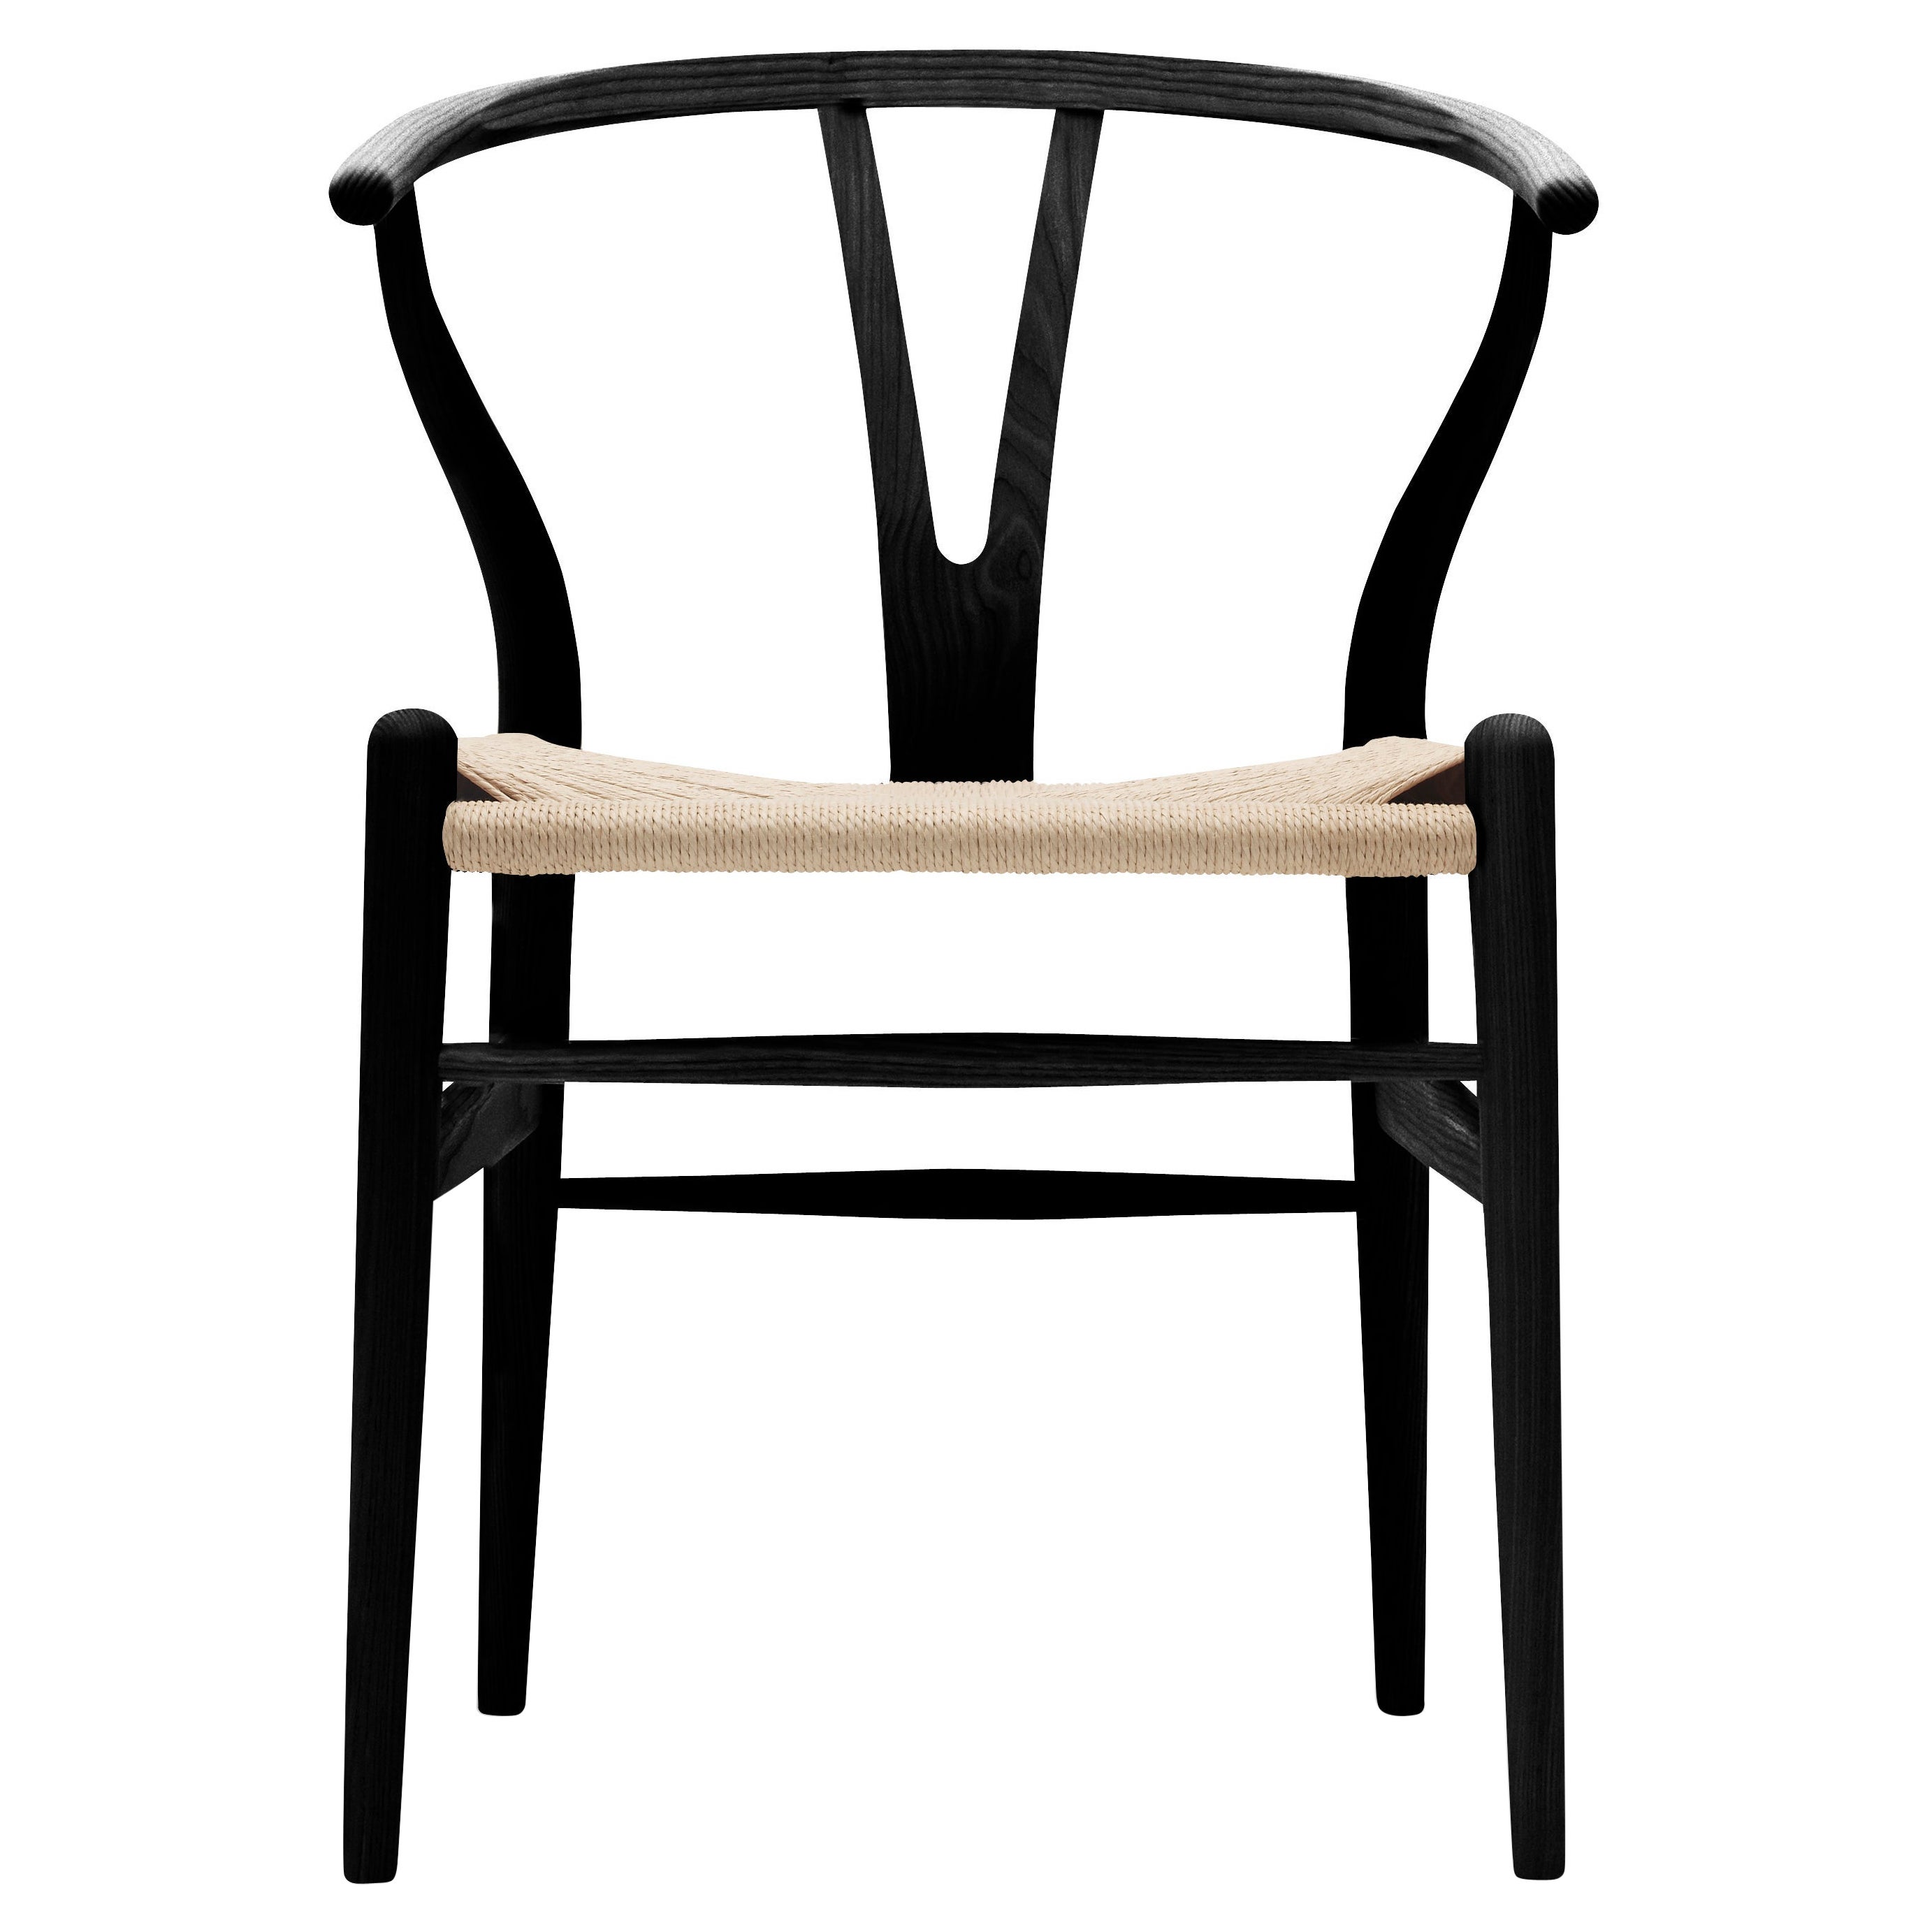 CH24 Wishbone Chair in Painted Black Ash & Natural Papercord Seat by Hans Wegner